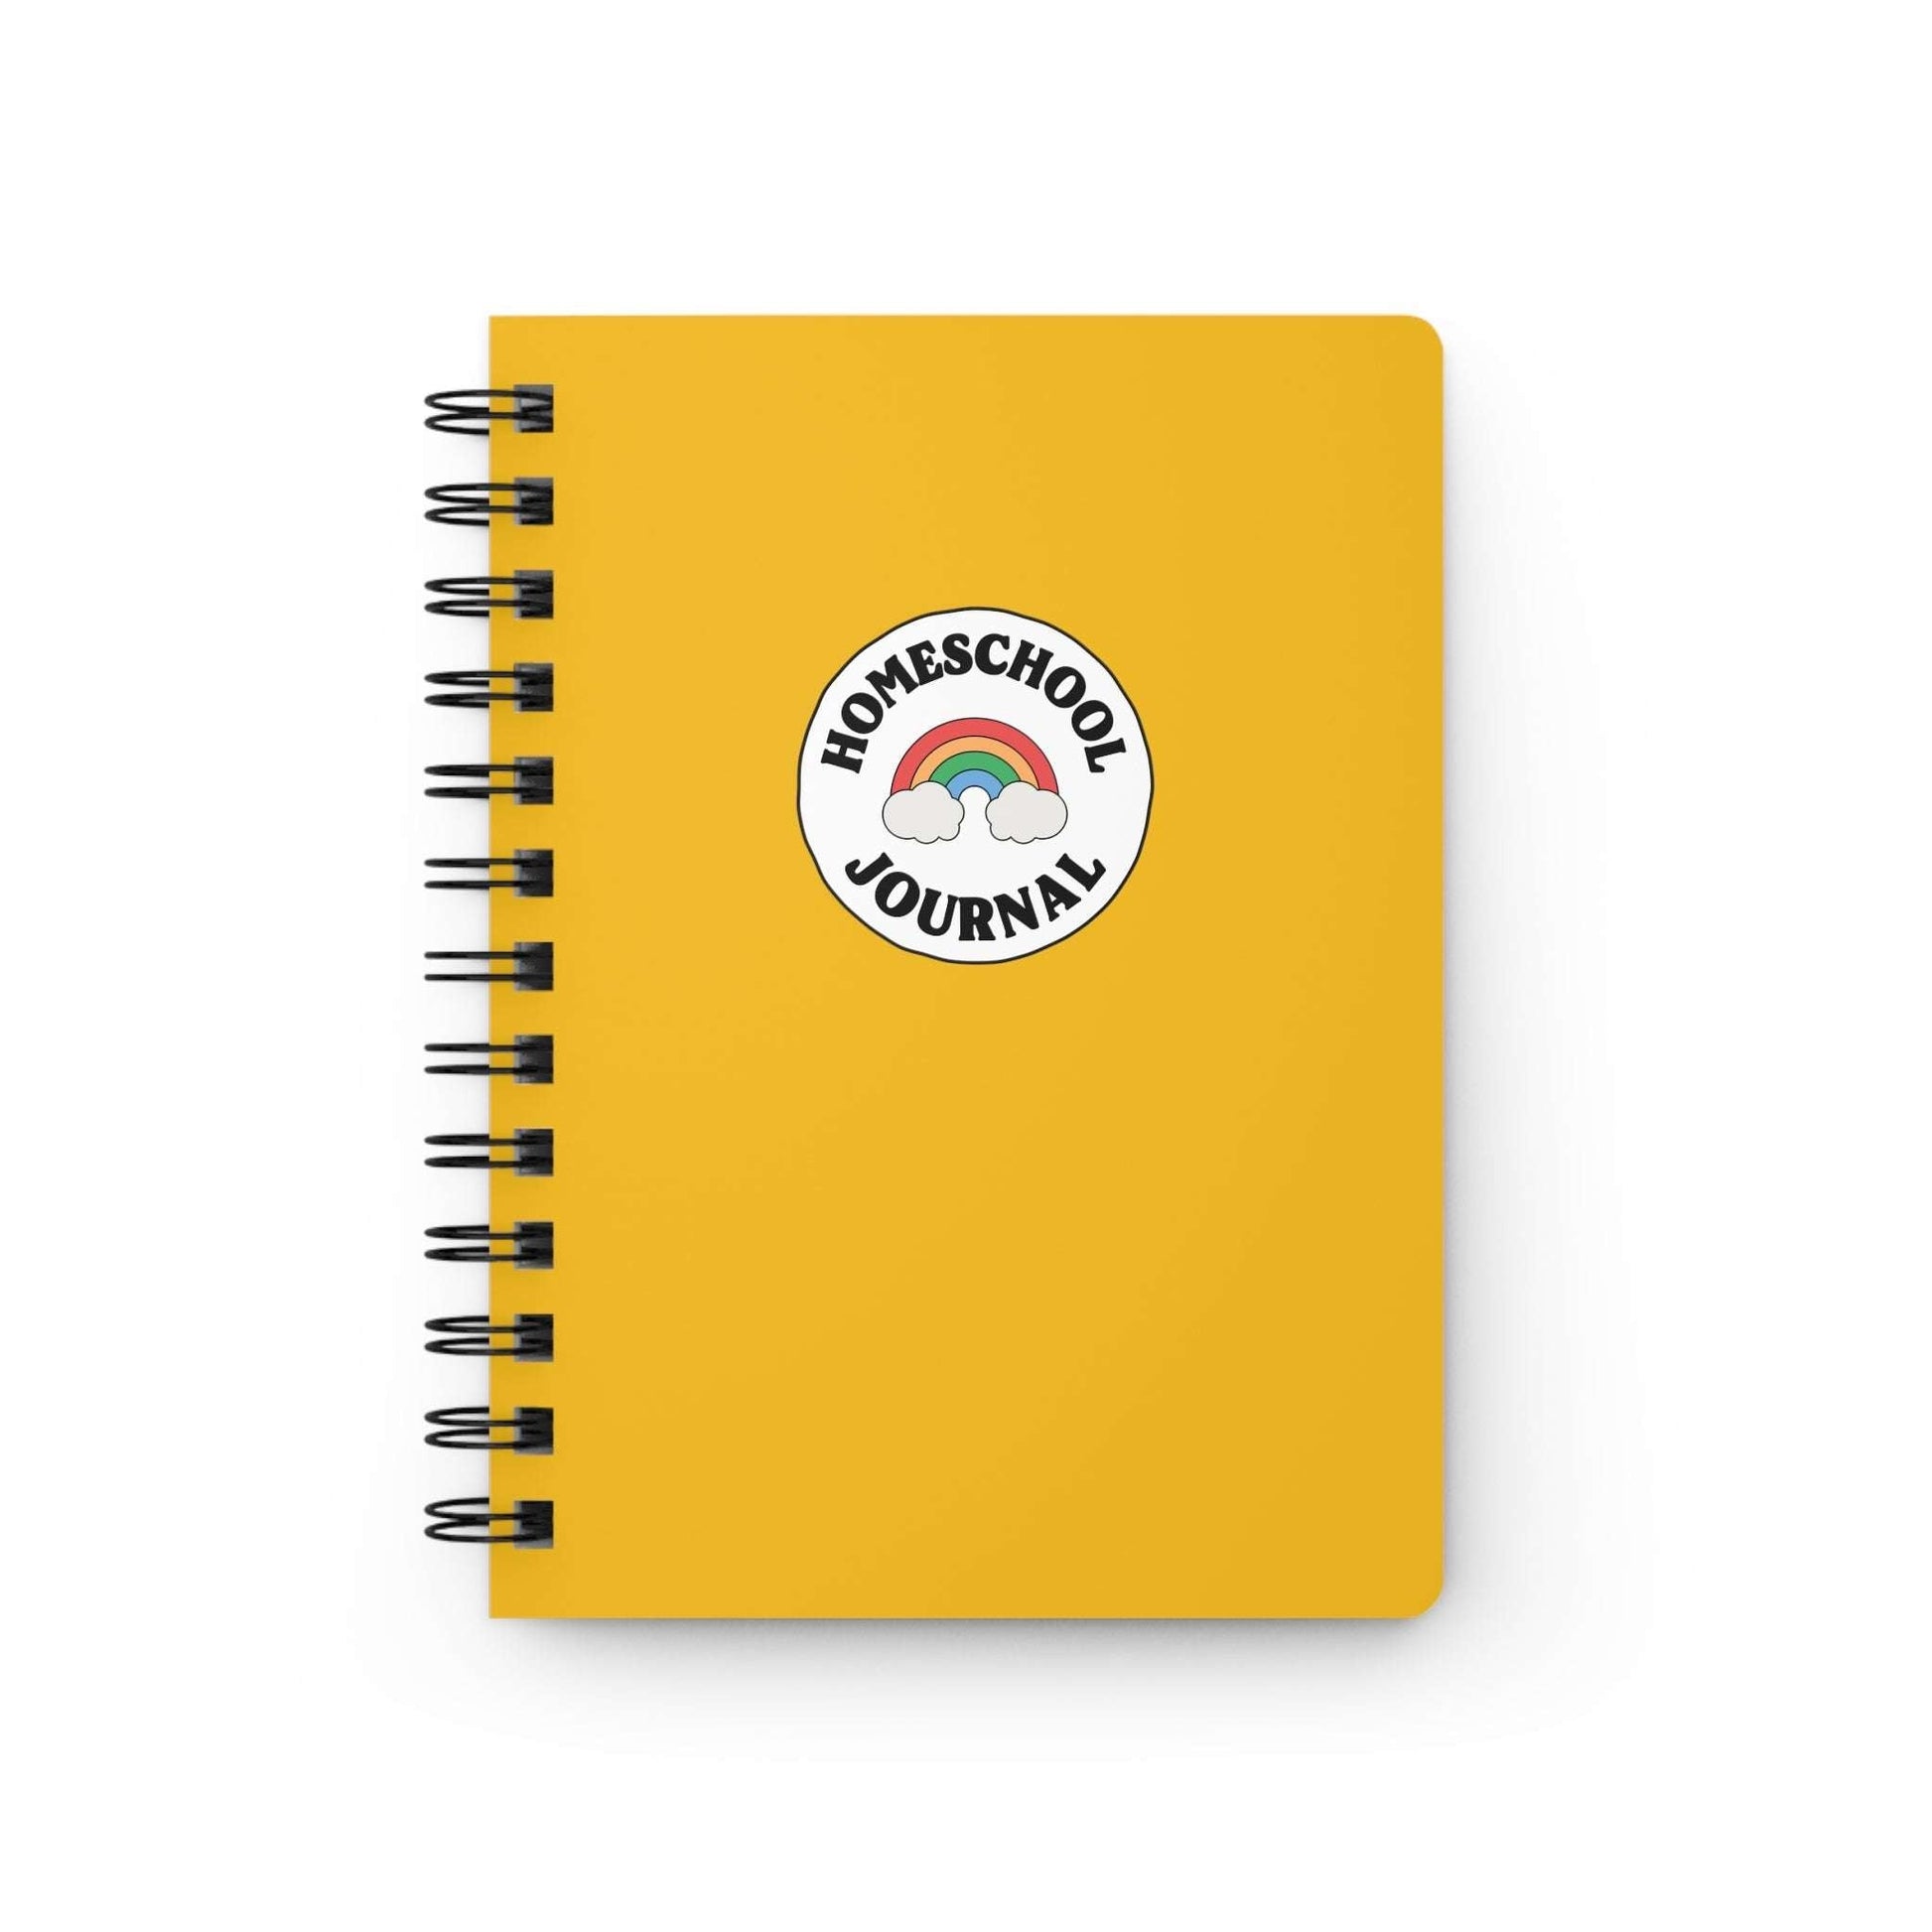 Rainbow Homeschool Spiral Bound JournalWolfe Paw DesignsRainbow Homeschool Spiral Bound JournalYellow - Rainbow homeschool lined journal
Your homeschooler can now write in style with our themed lined journals made for kids just like yours!
Each color has its oRainbow Homeschool Spiral Bound Journal